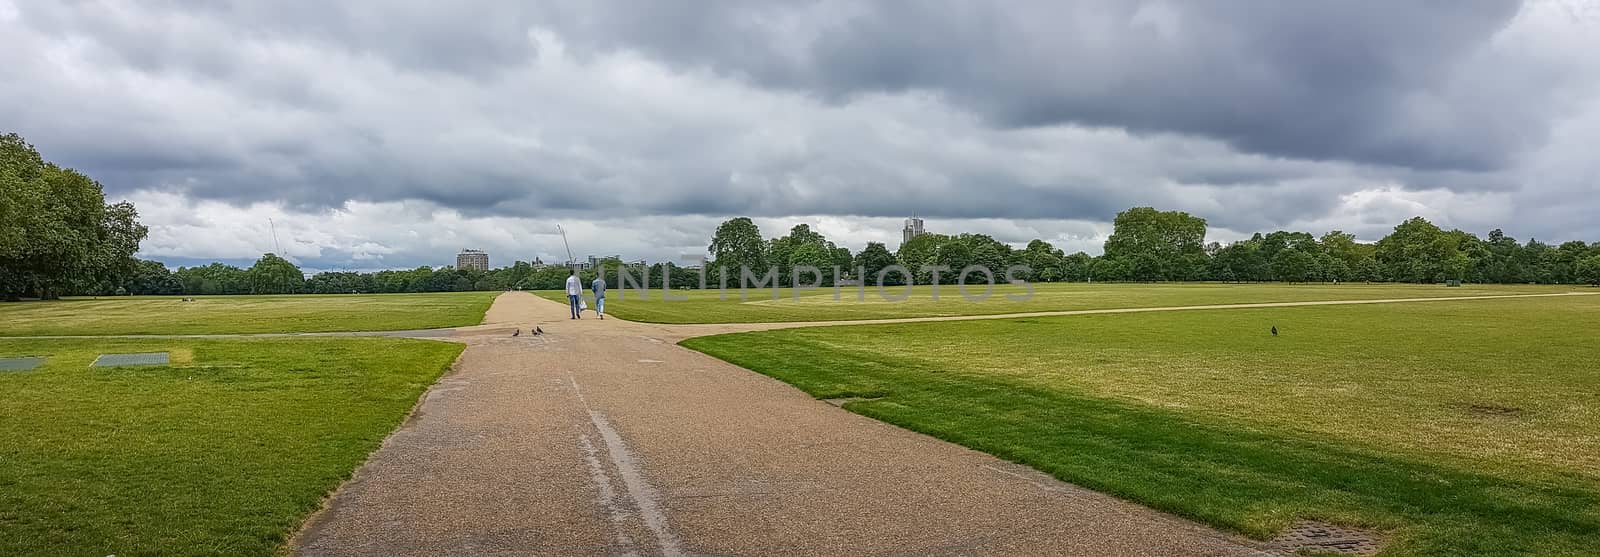 Panorama of Hyde Park field with two unrecognizable people walking in the middle of it. Cloudy sky as a background.